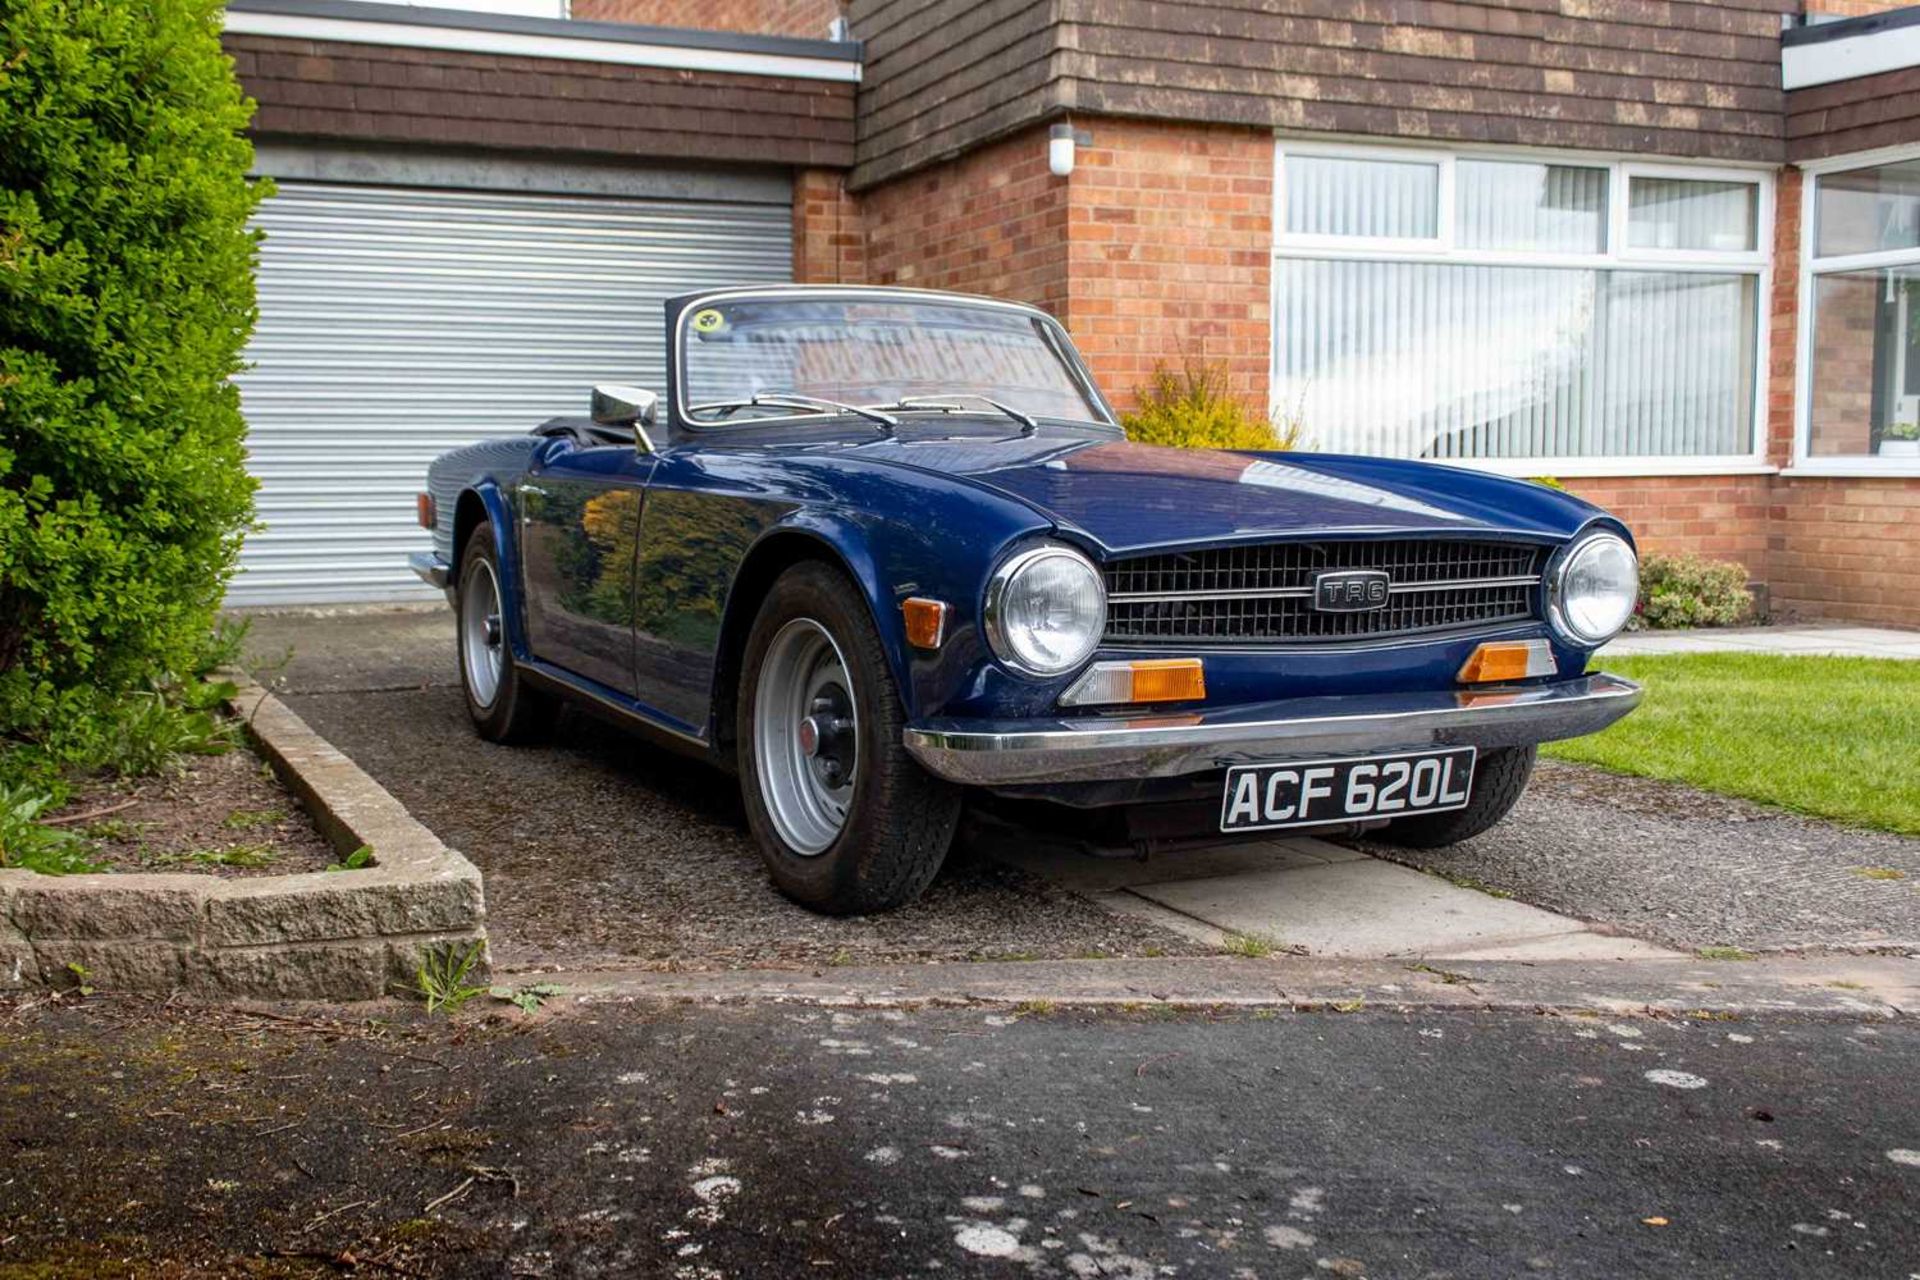 1972 Triumph TR6 Home market example, specified with manual overdrive transmission